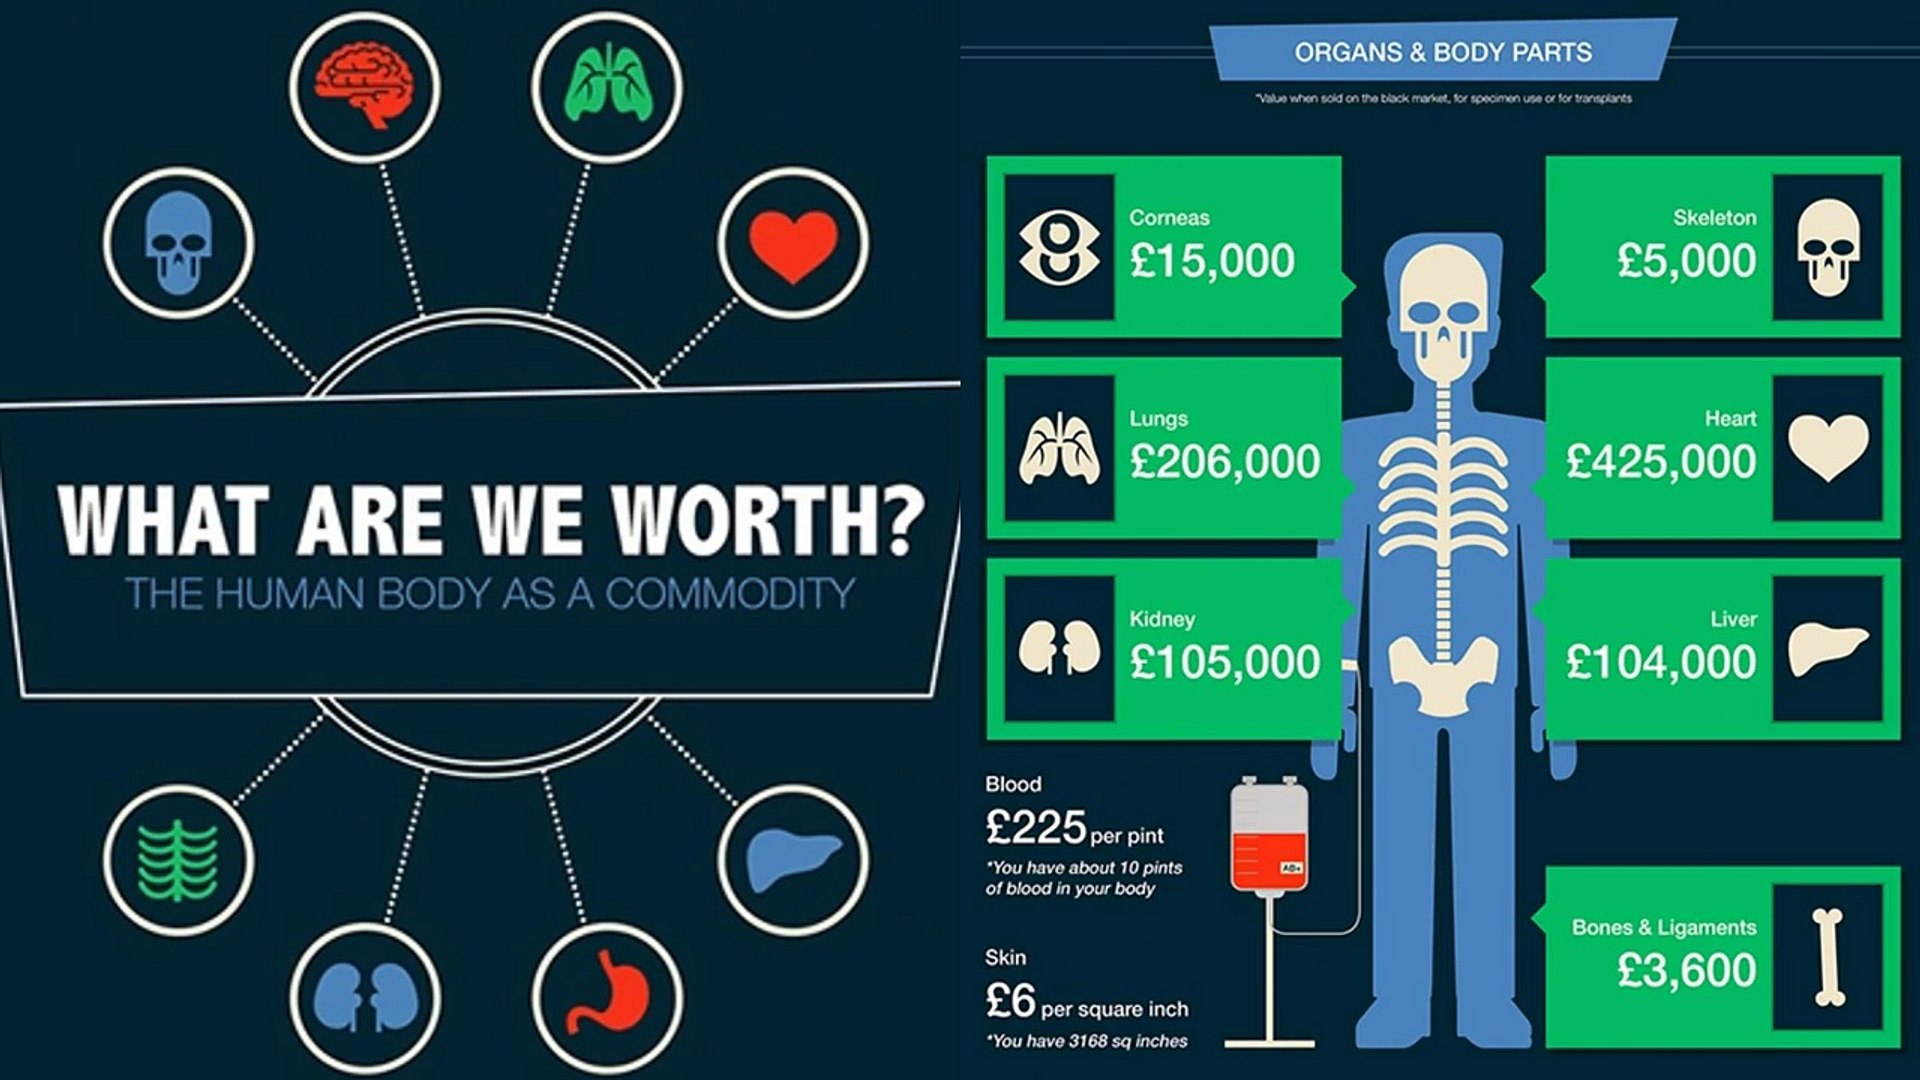 How Much Do Body Parts Cost On The Dark Web